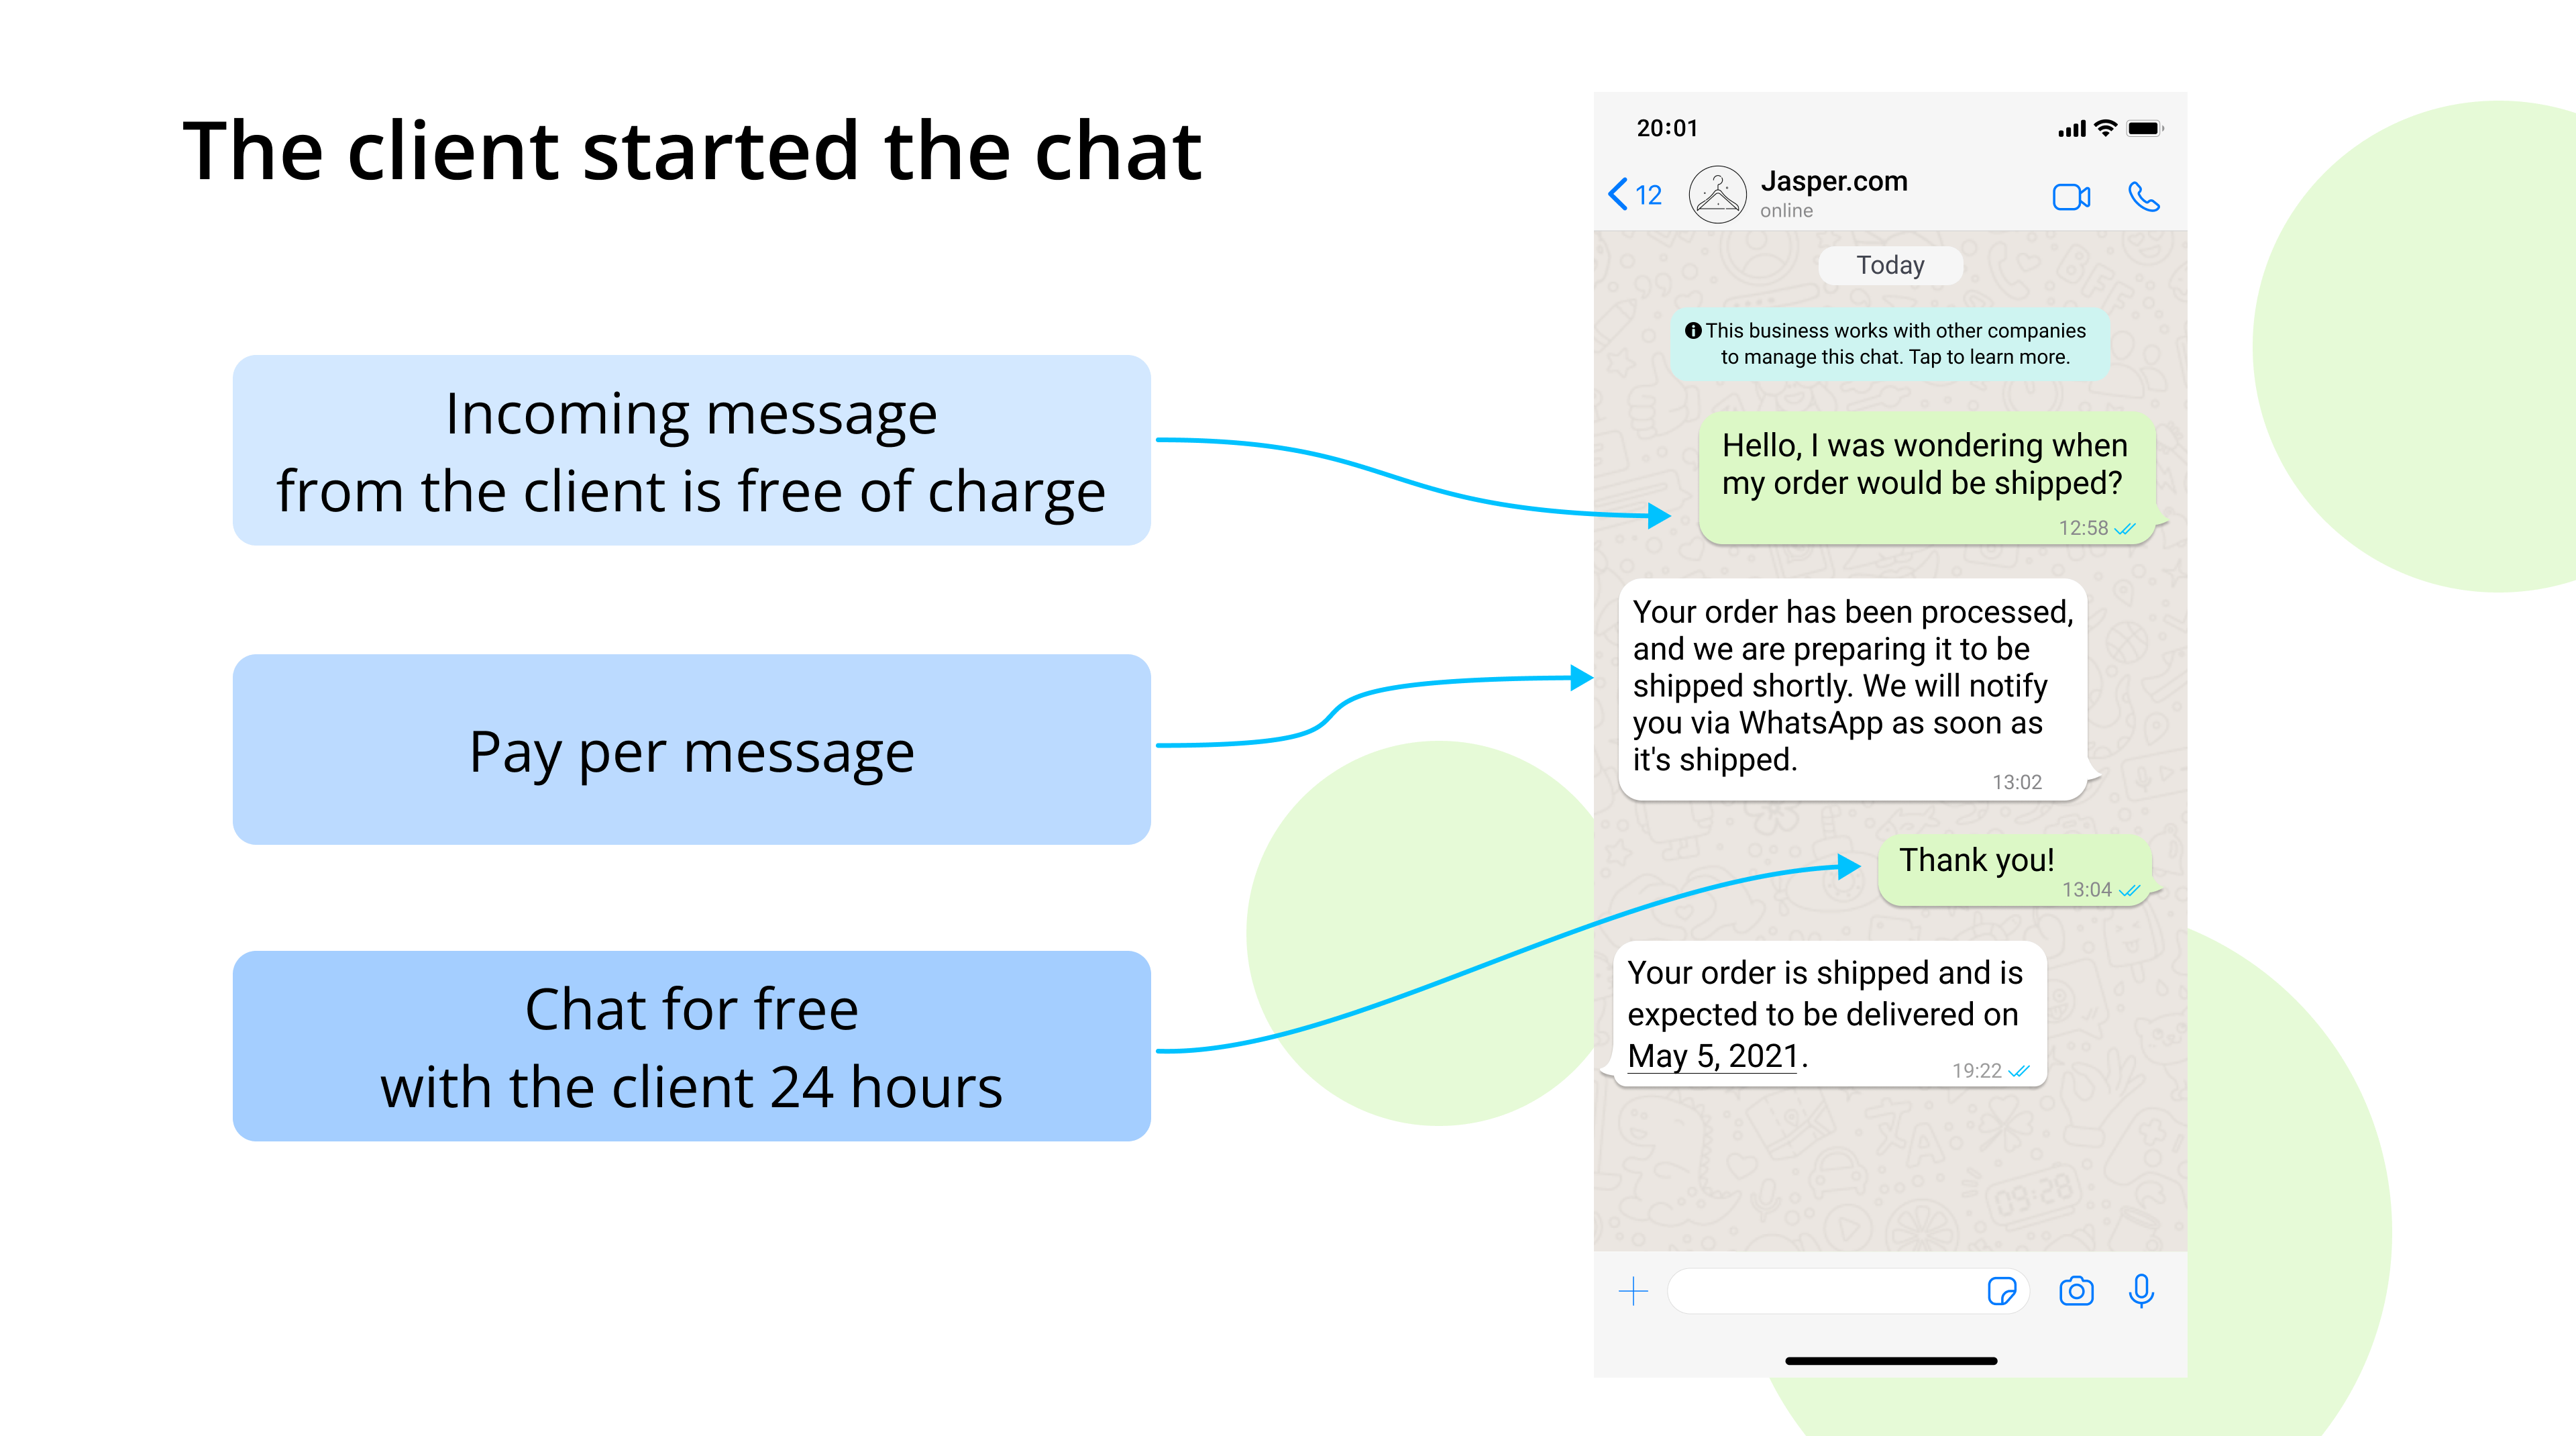 Example of a 24-hour session: the client started a dialogue